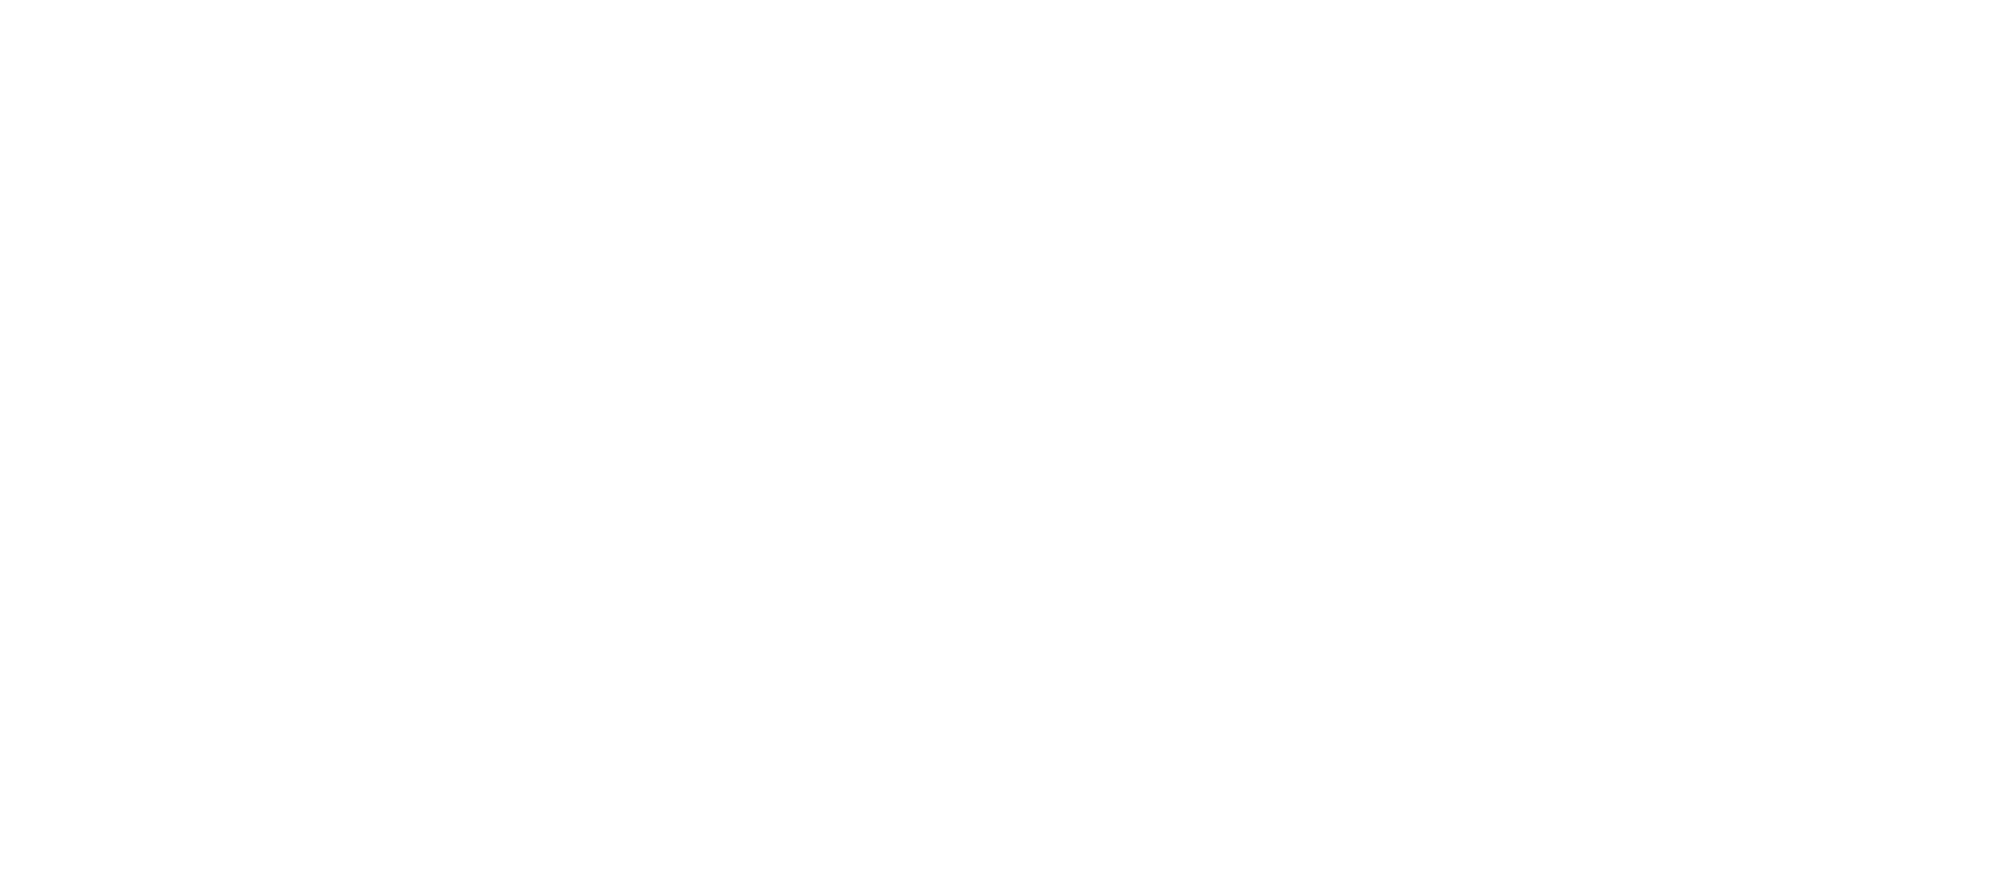 Global Industrial Components, Inc.